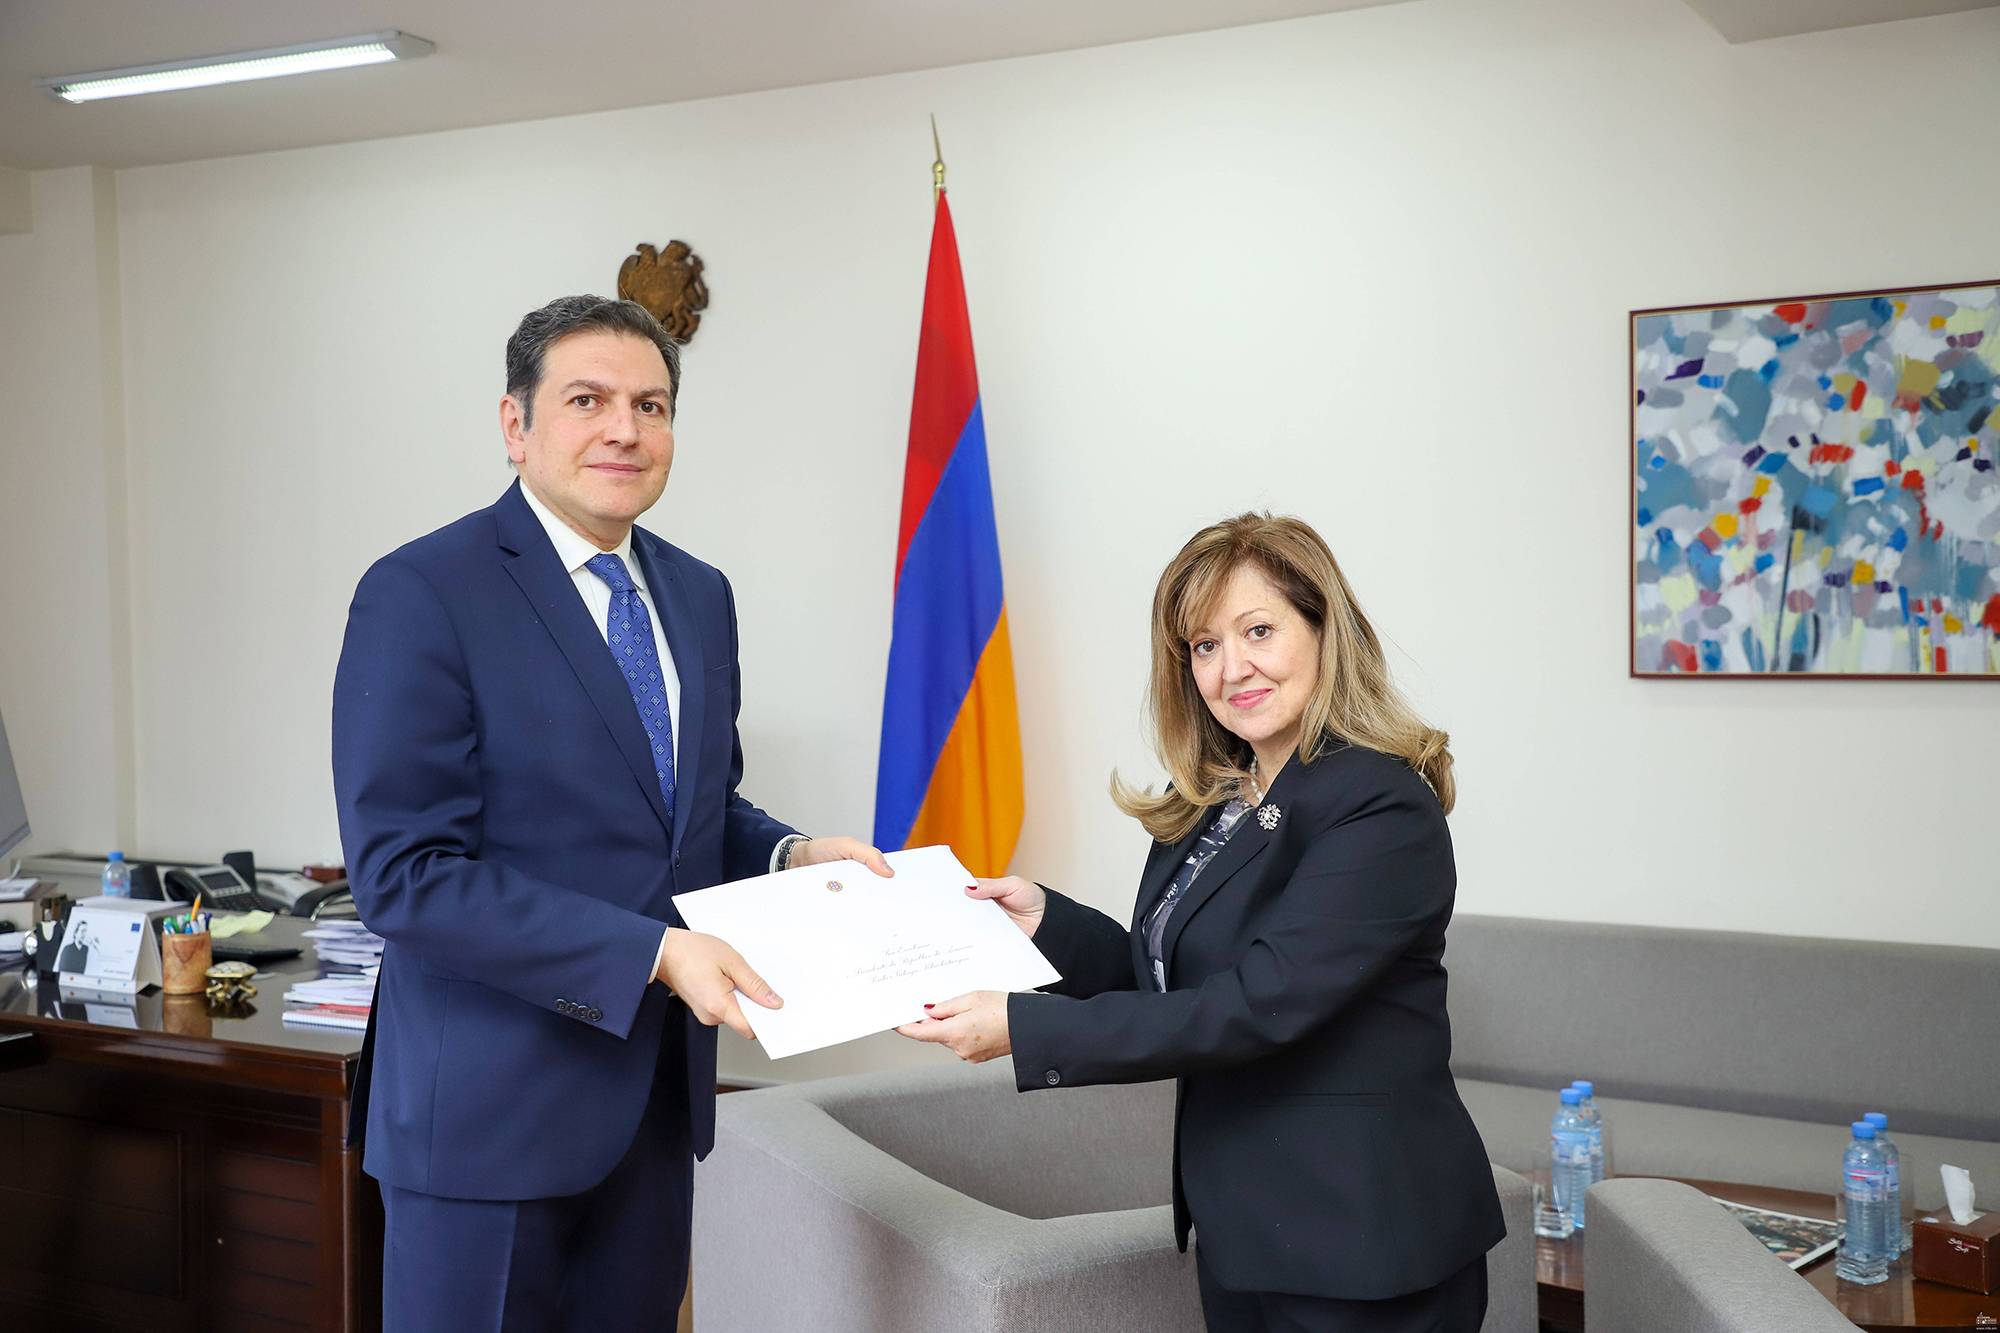 The Ambassador of Portugal presented  copies of her credentials to Armenia’s Deputy Foreign Minister